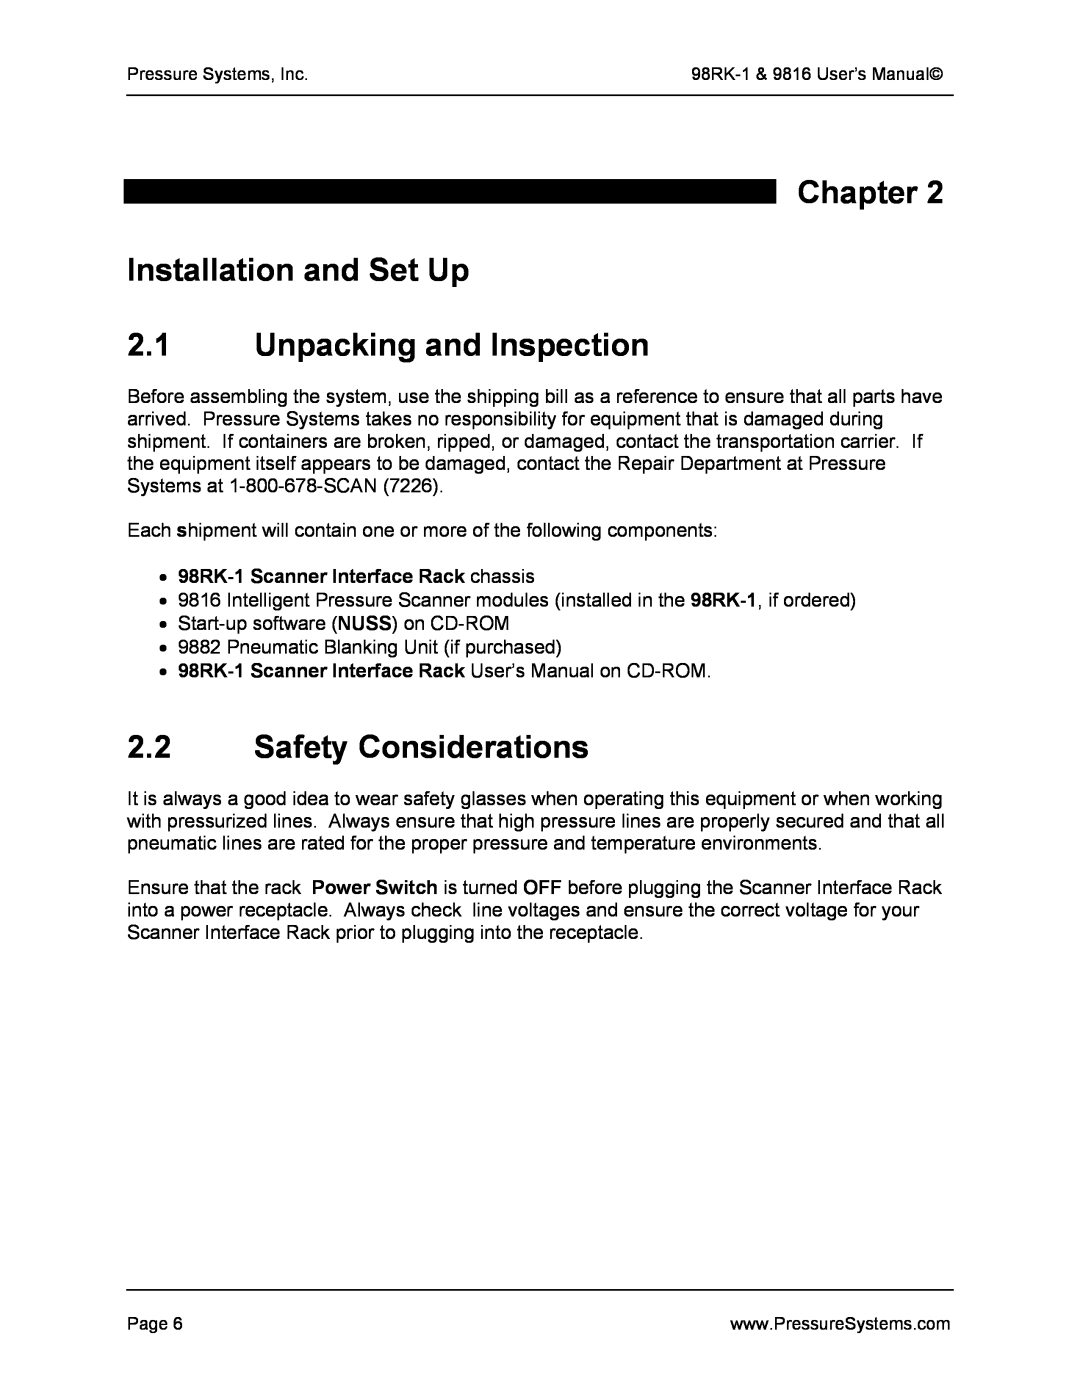 Pressure Systems 98RK-1 user manual Chapter Installation and Set Up 2.1 Unpacking and Inspection, Safety Considerations 